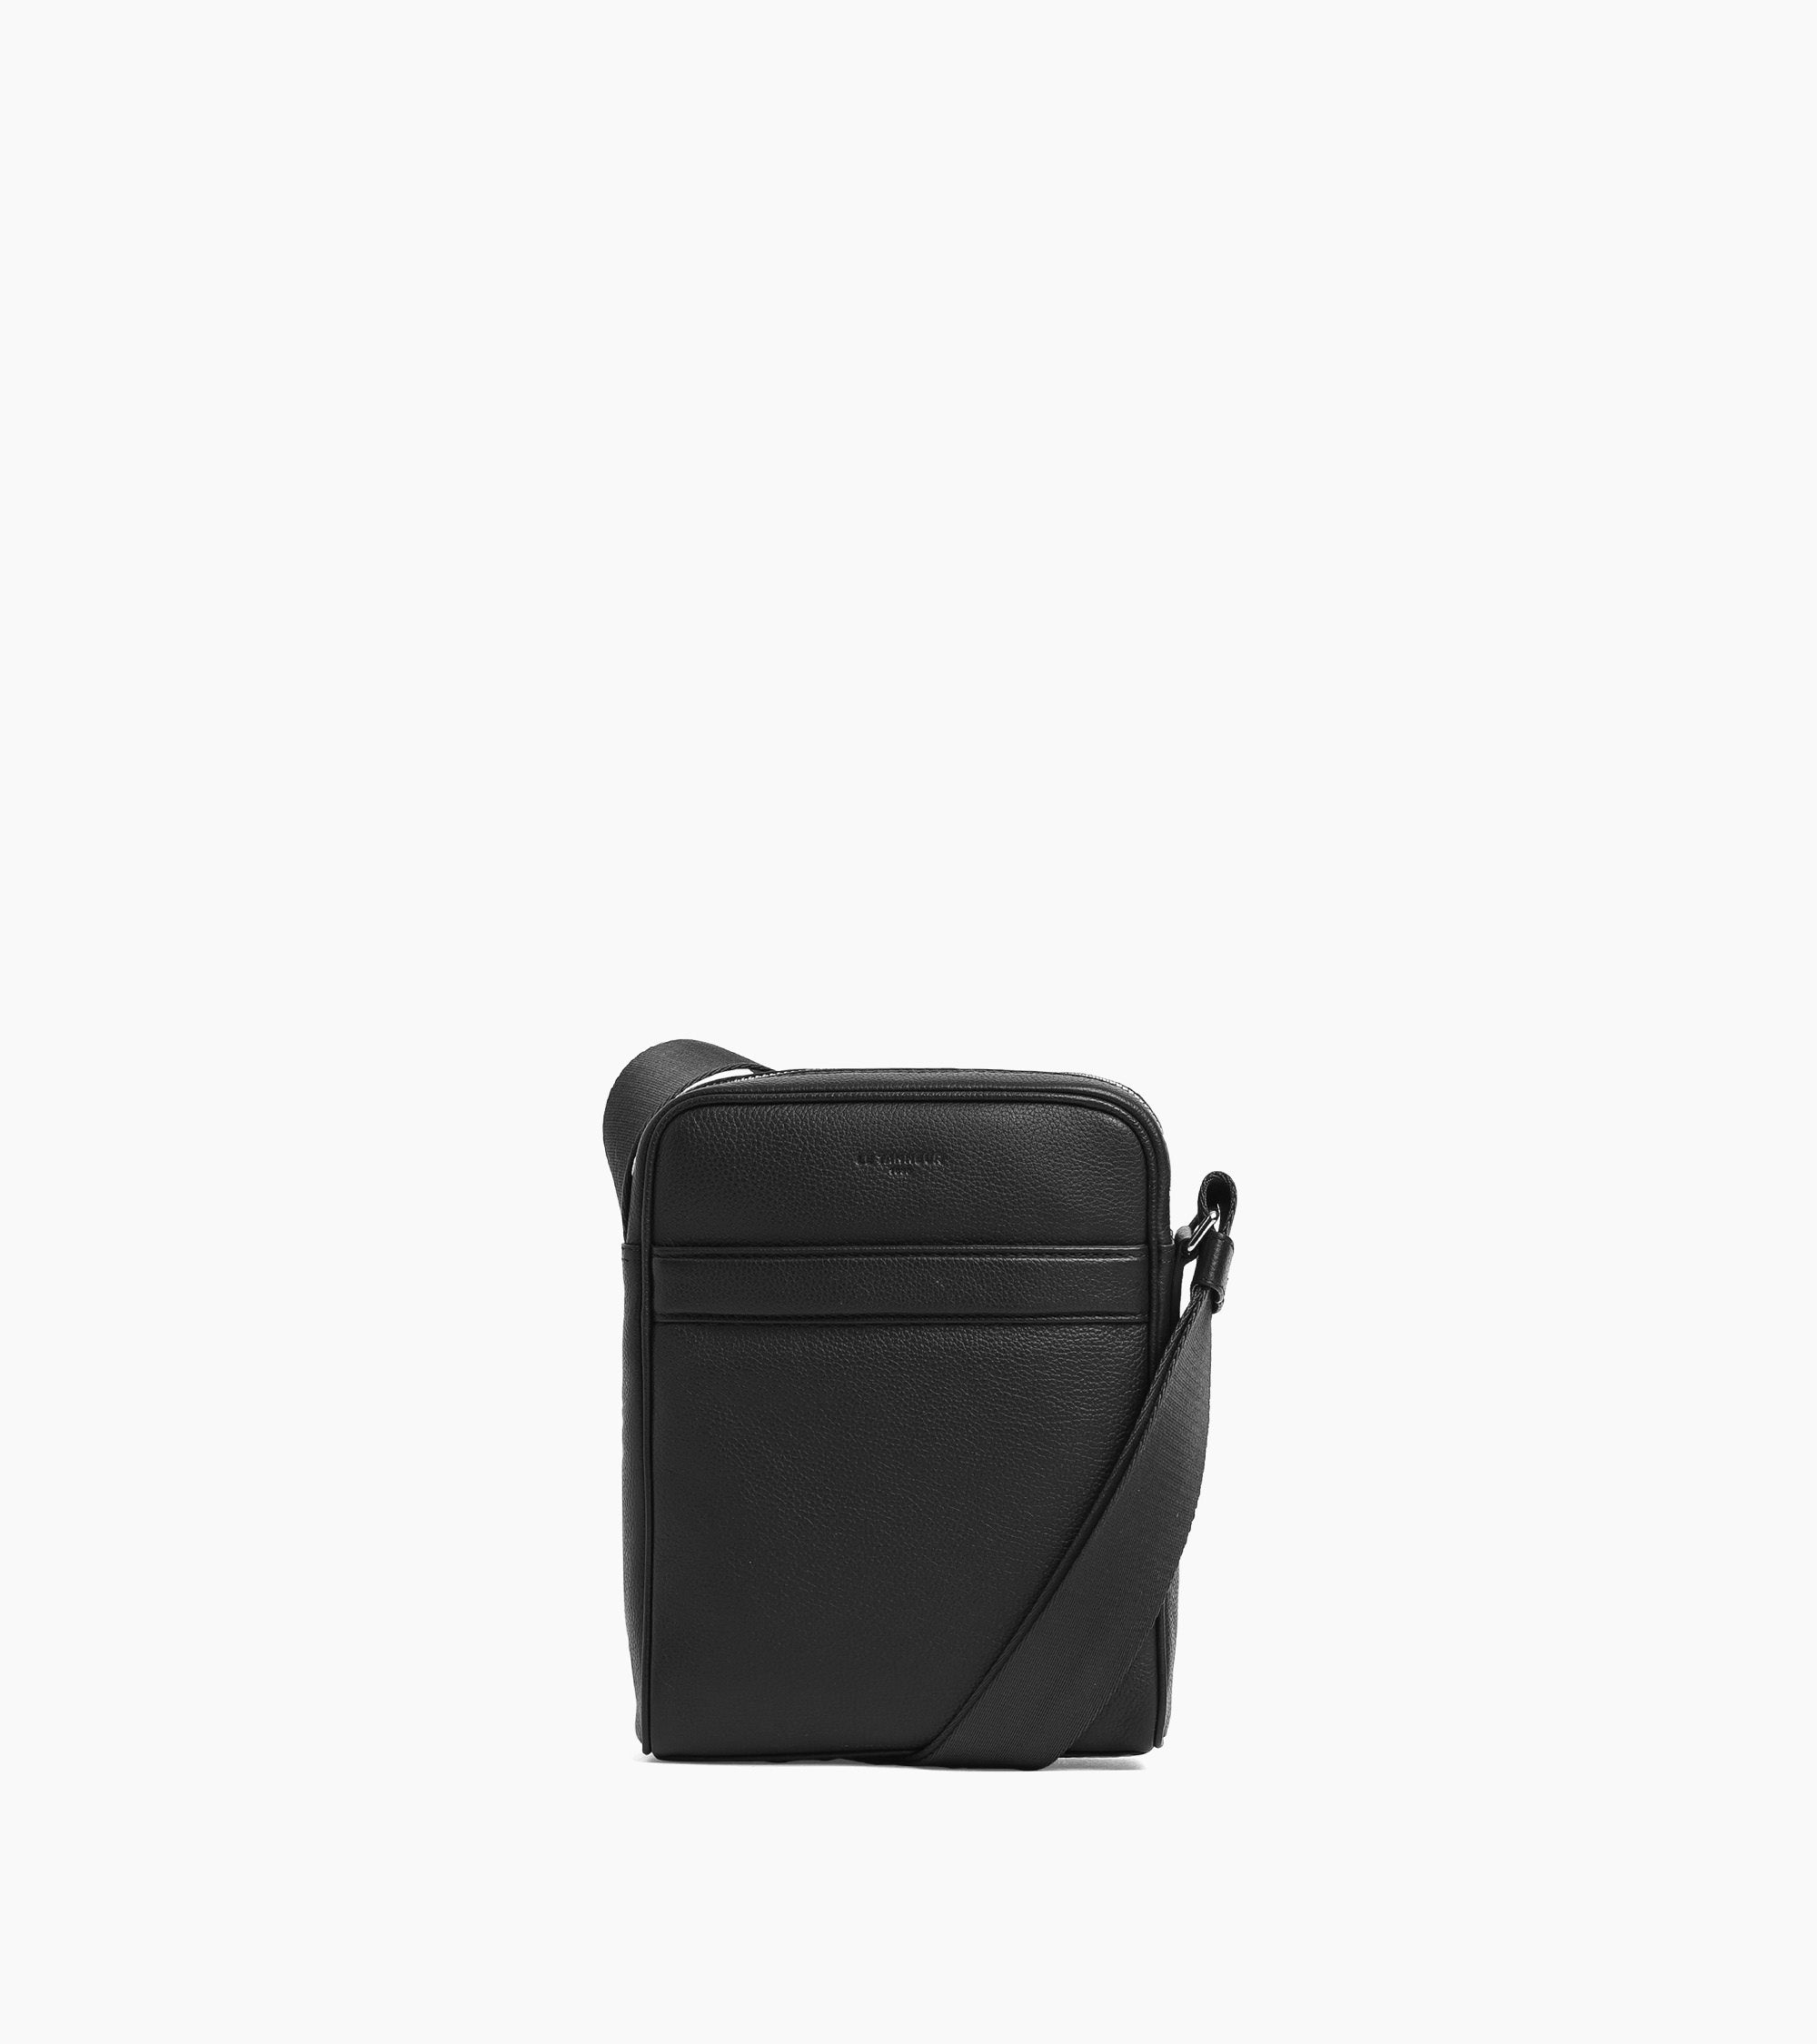 Charles small cross body bag in grained leather